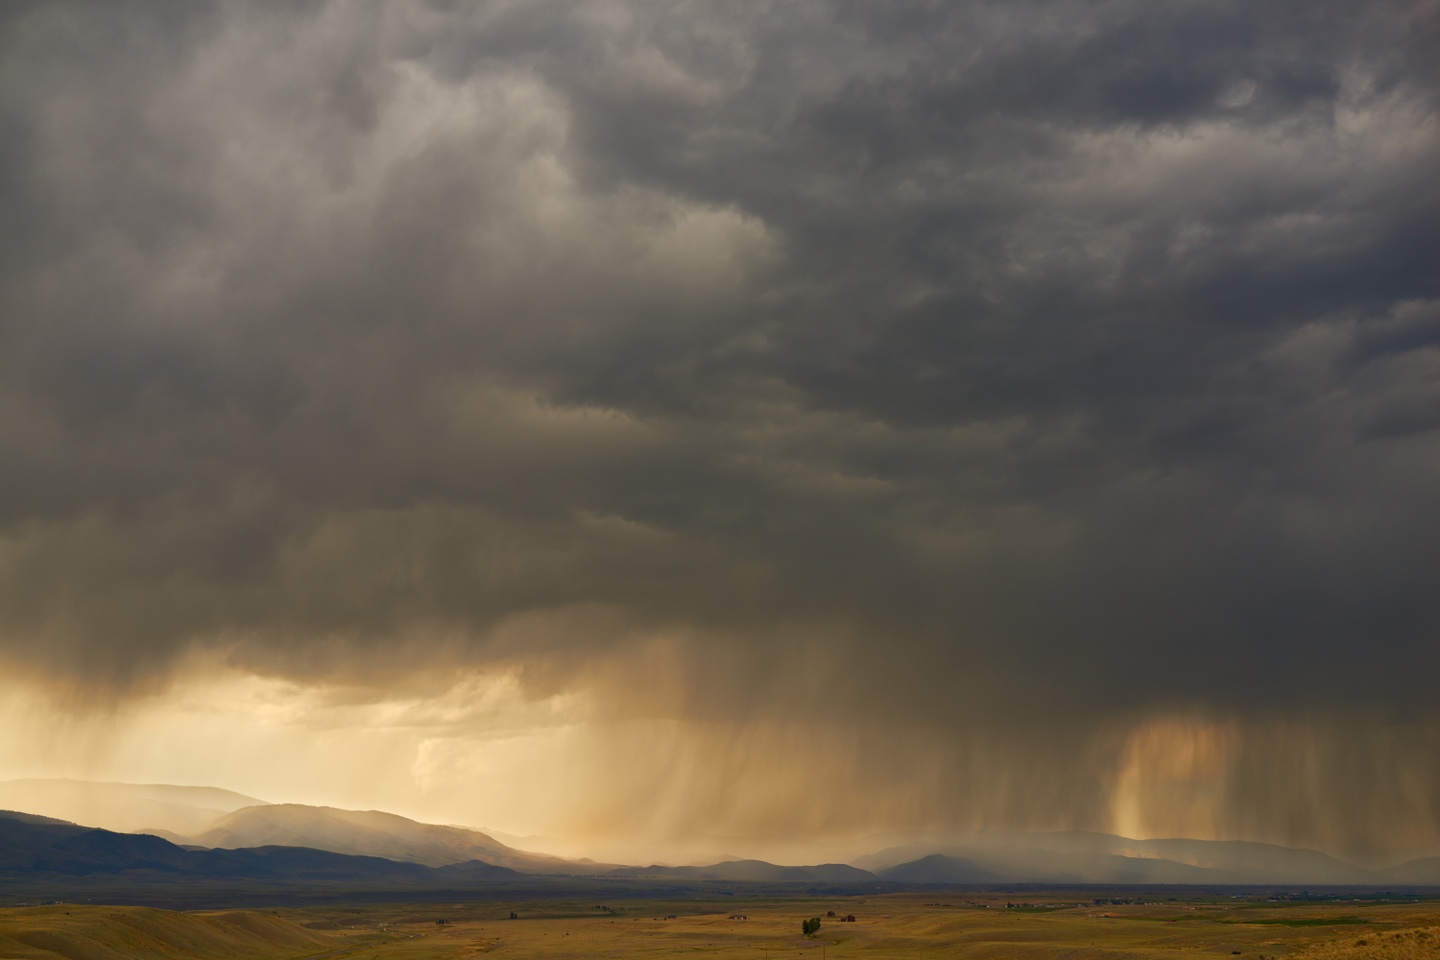 Landscape photo of a dense bank of rainclouds taking up 2/3 of the image, over a sandy plain climbing to foothills in the distance.